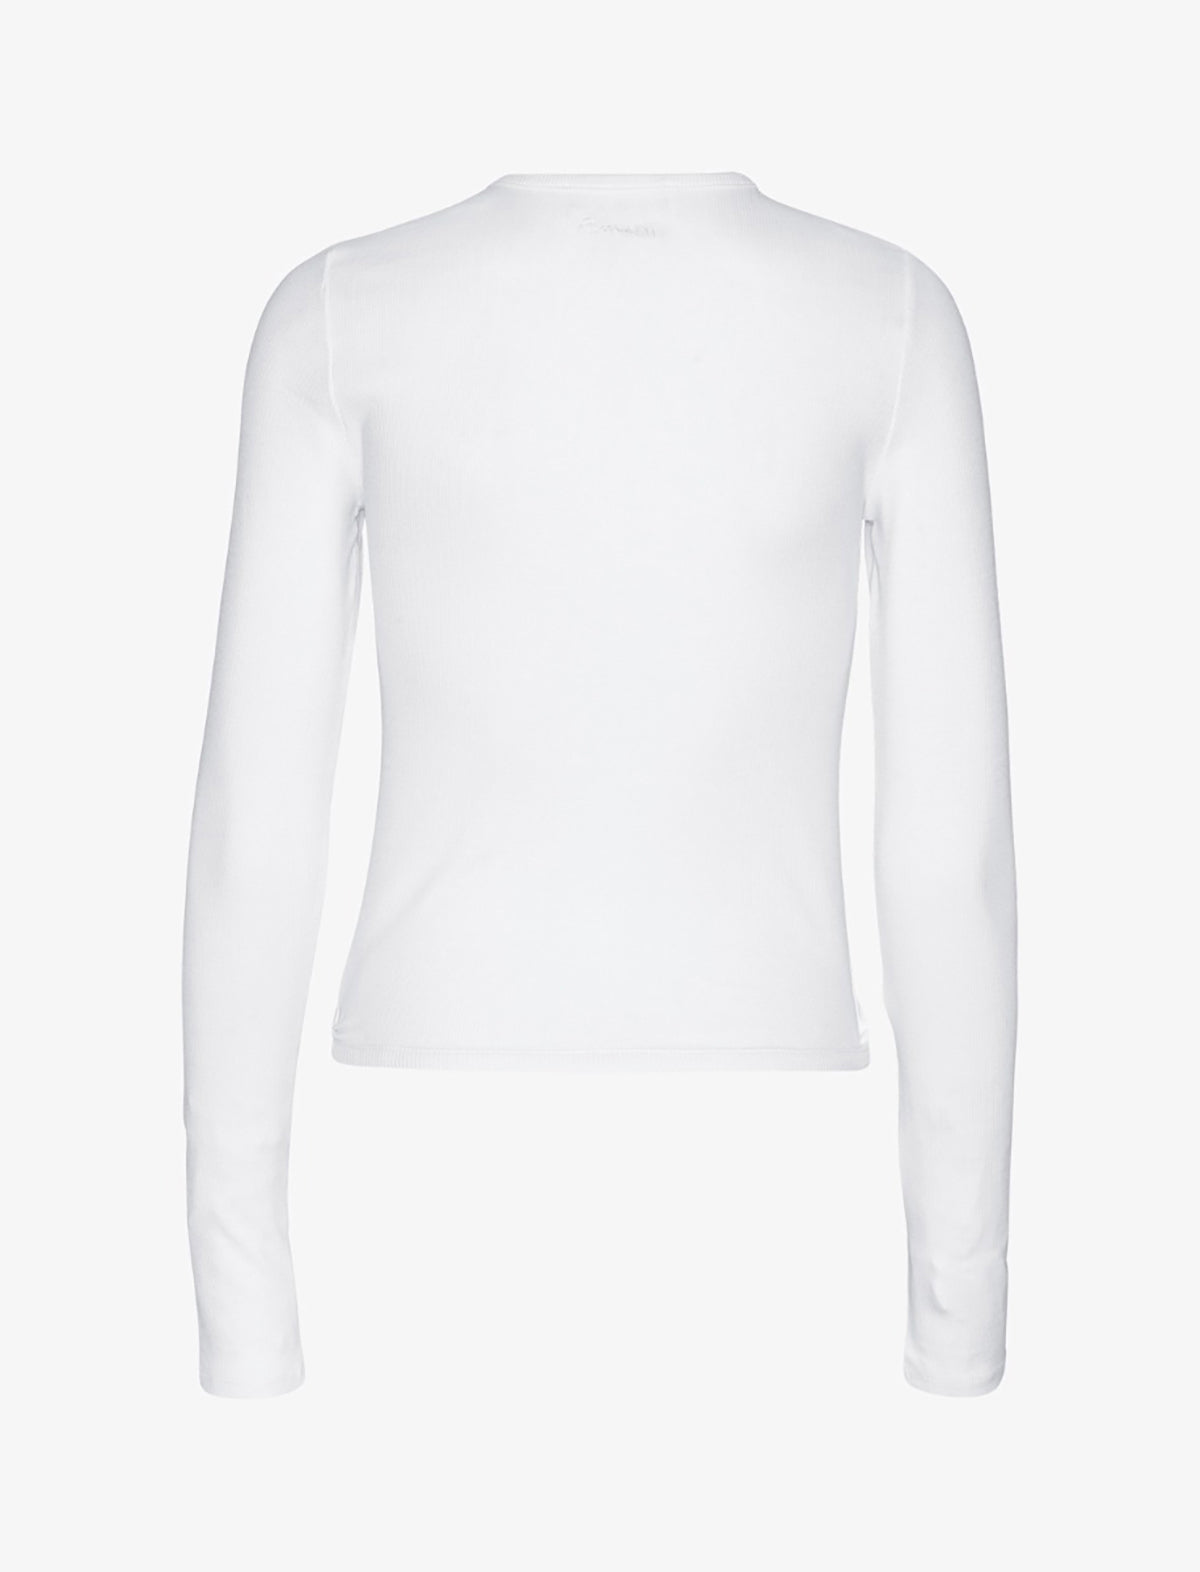 REMAIN Long Sleeve Shirt in Bright White